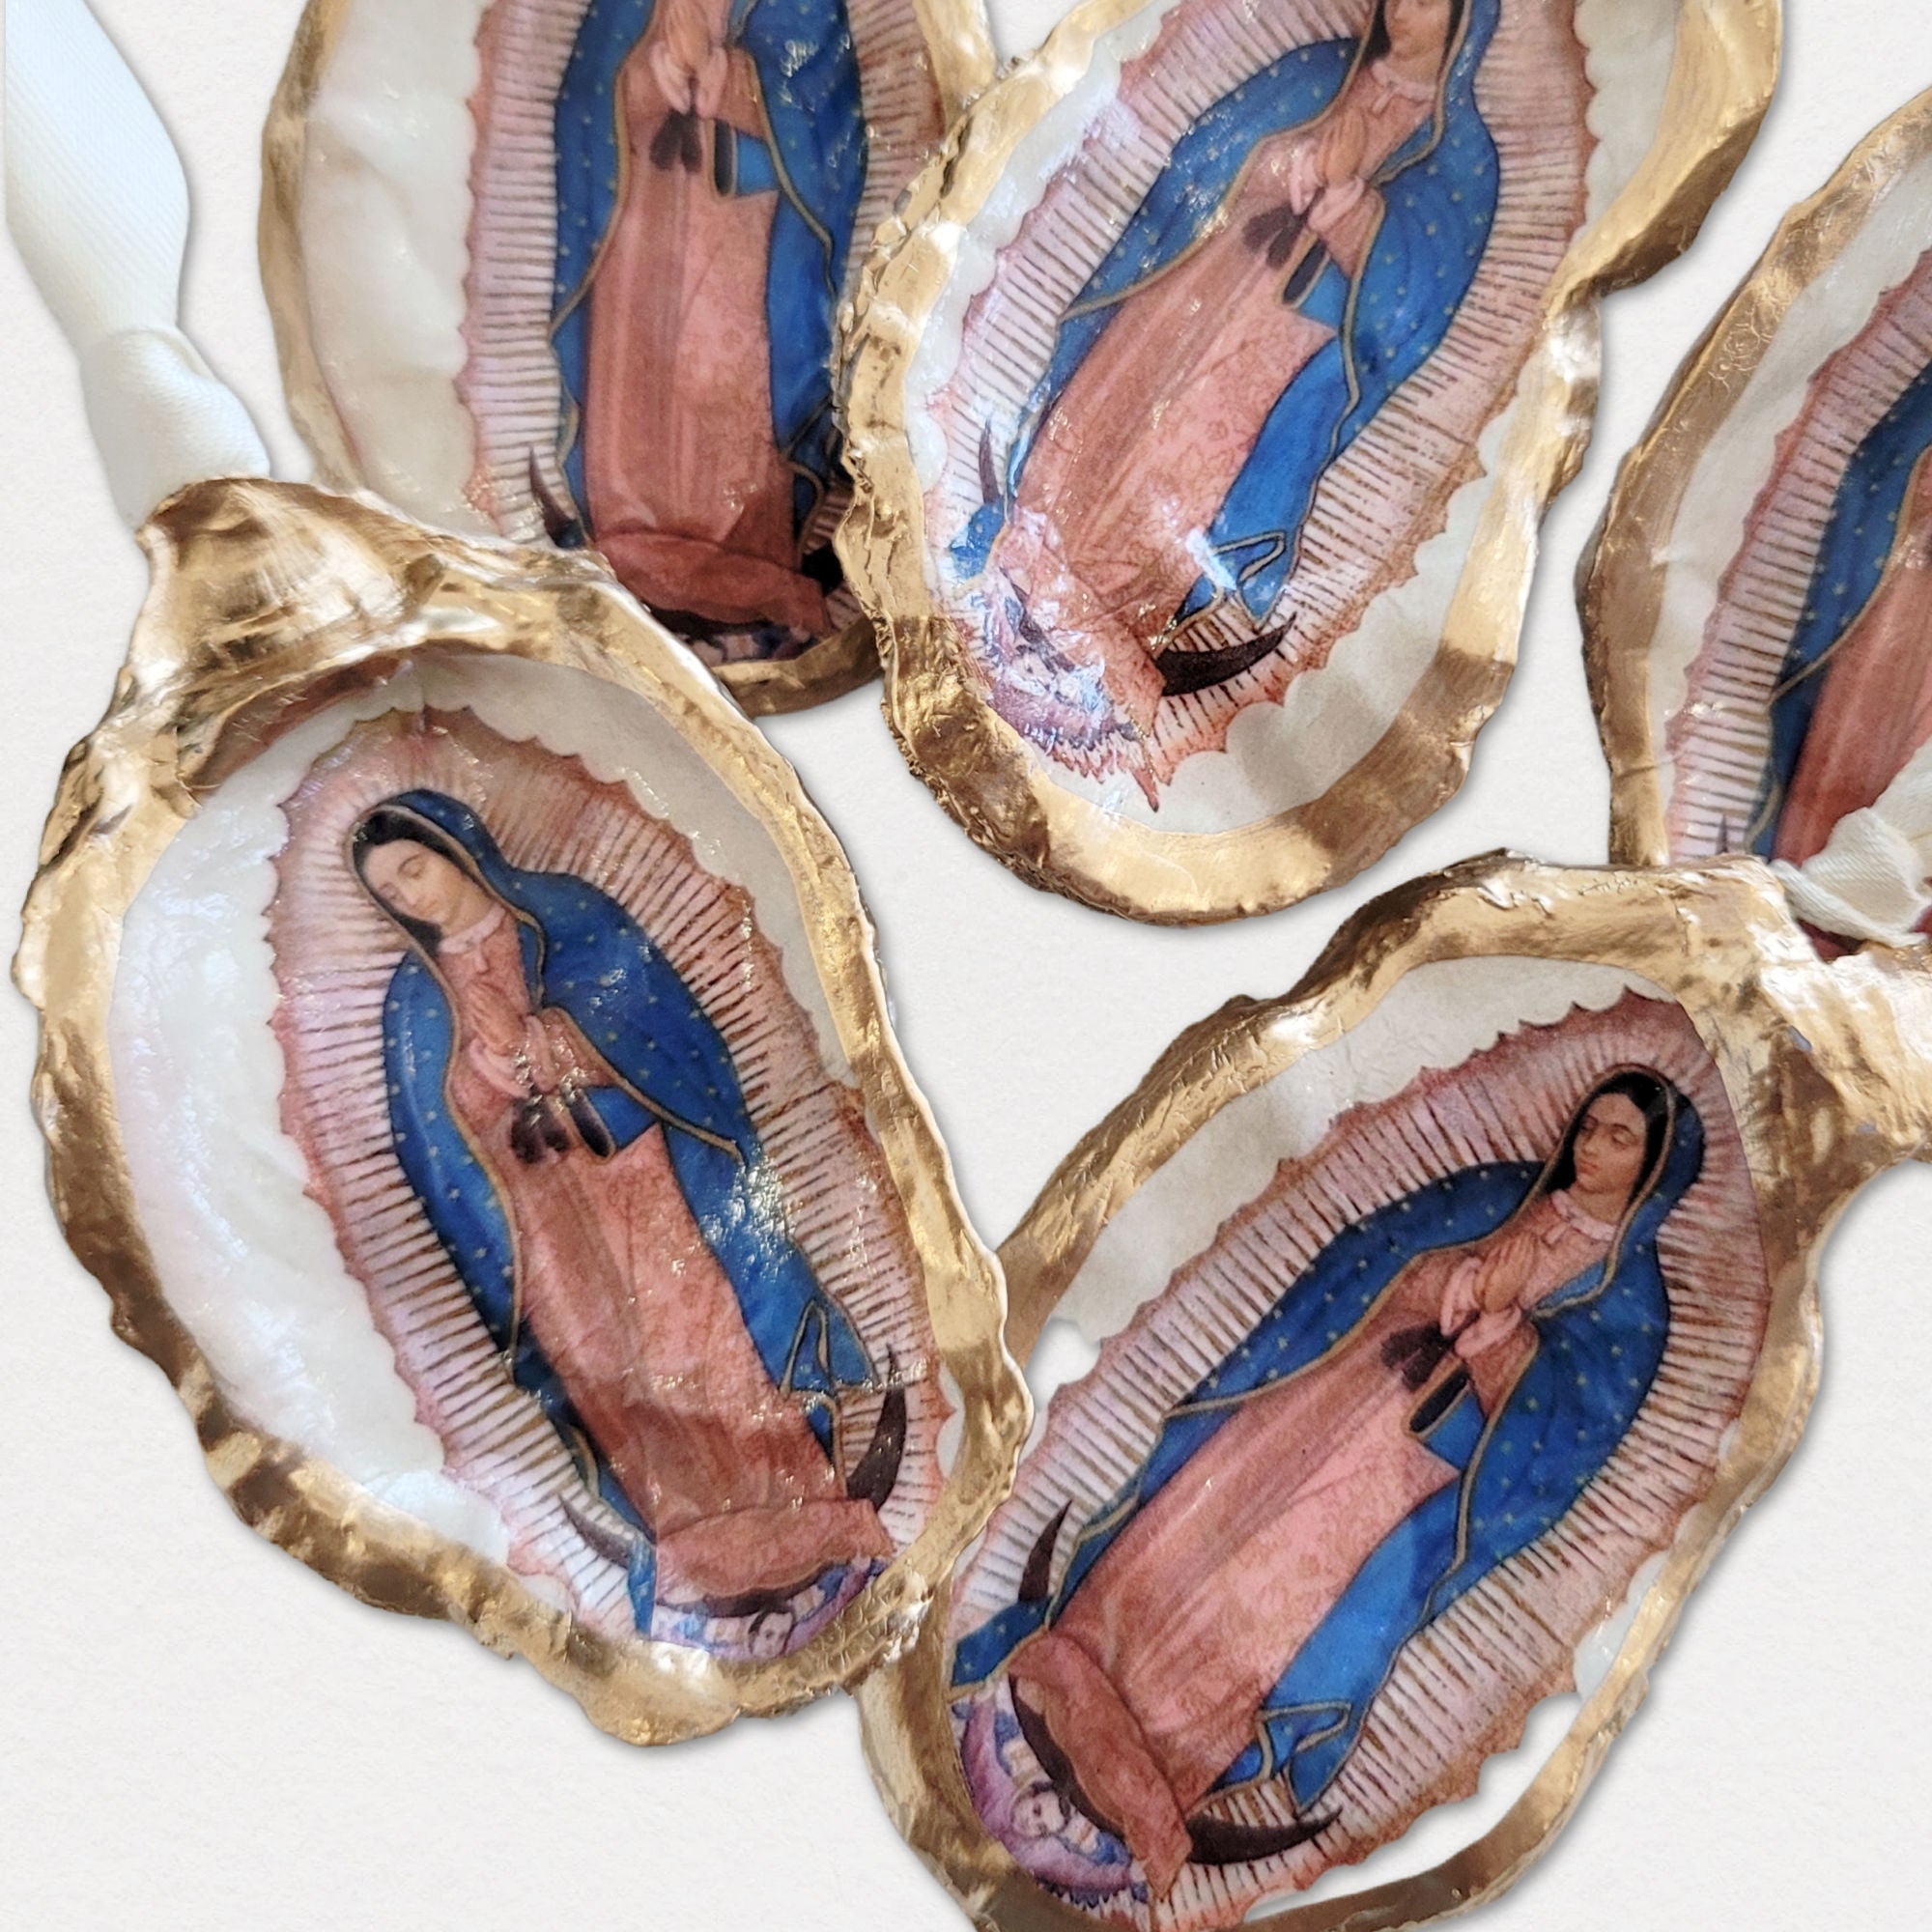 Our Lady of Guadalupe Ornament • Oyster Shell